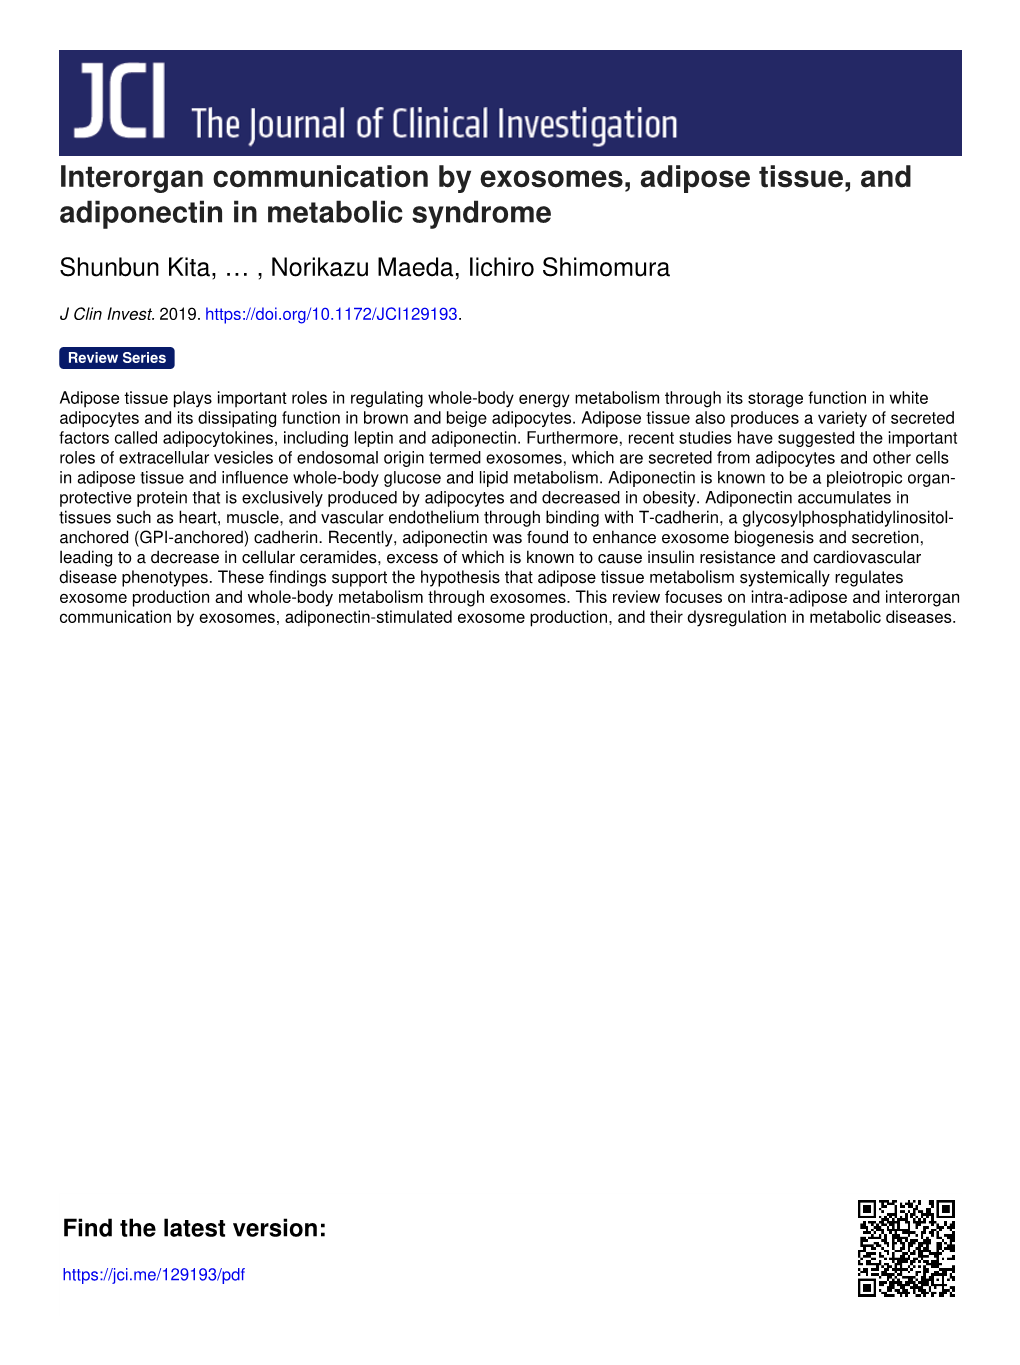 Interorgan Communication by Exosomes, Adipose Tissue, and Adiponectin in Metabolic Syndrome